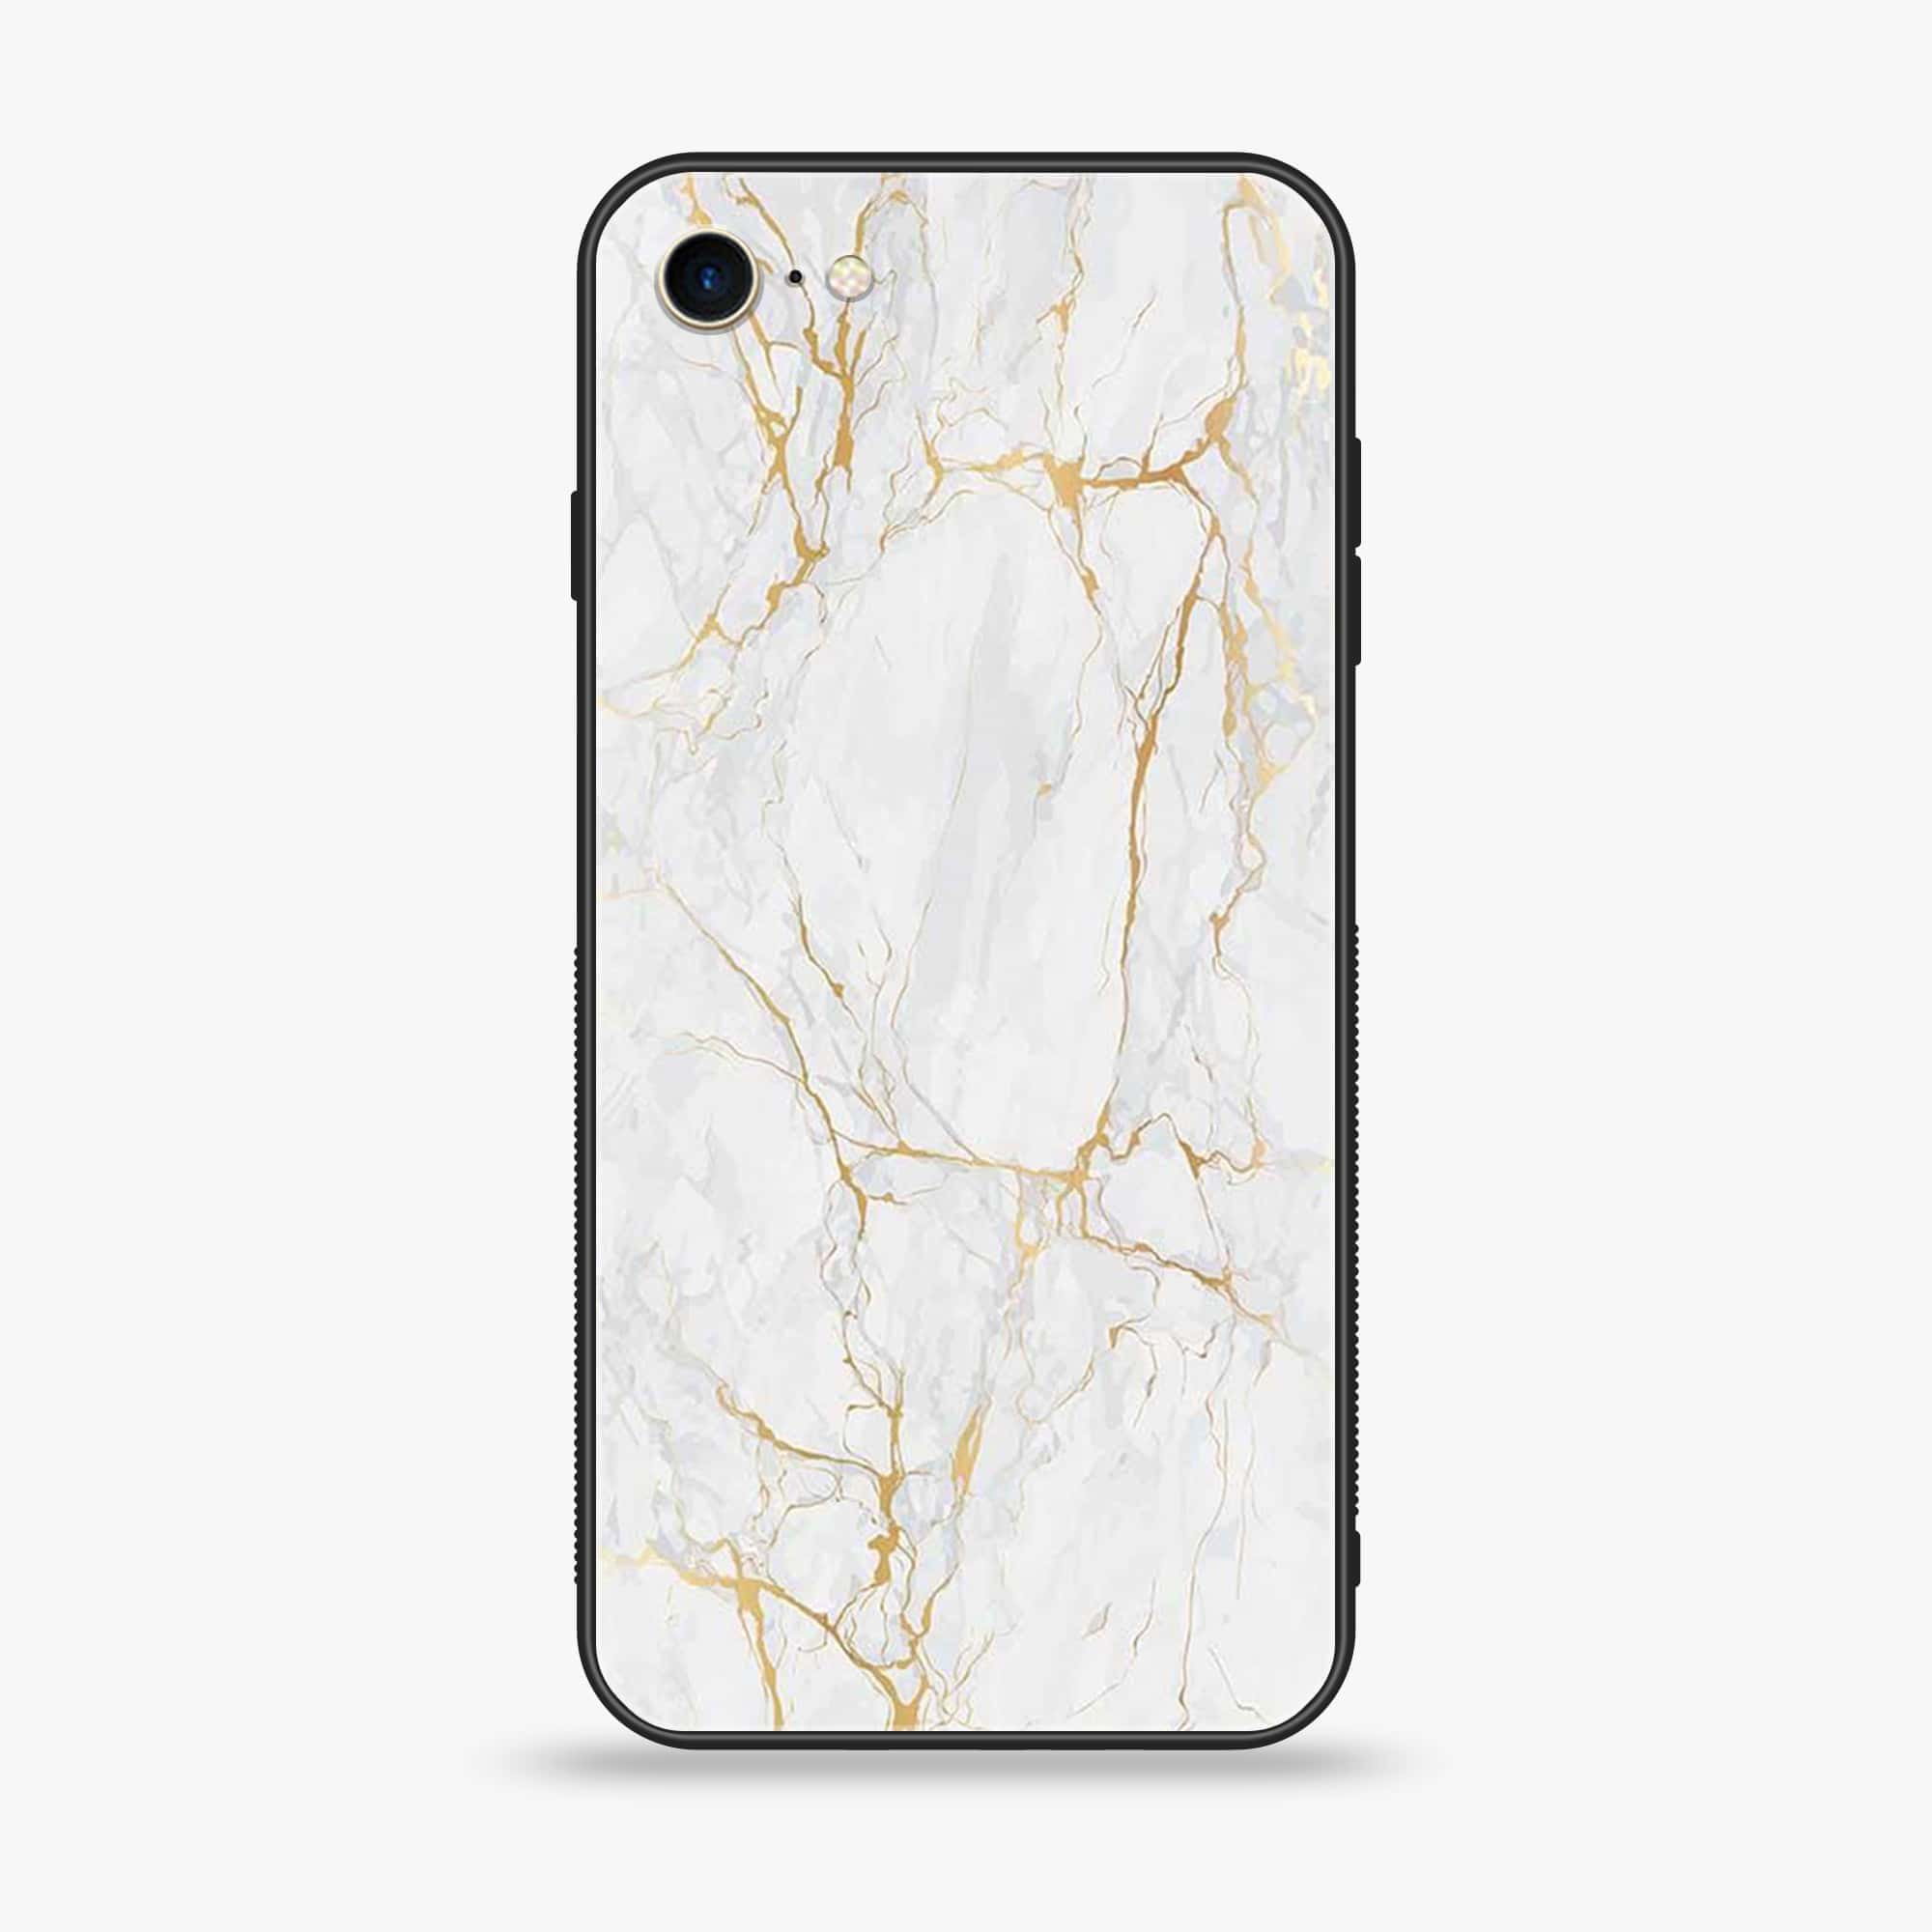 iPhone SE 2020- White Marble Series - Premium Printed Glass soft Bumper shock Proof Case